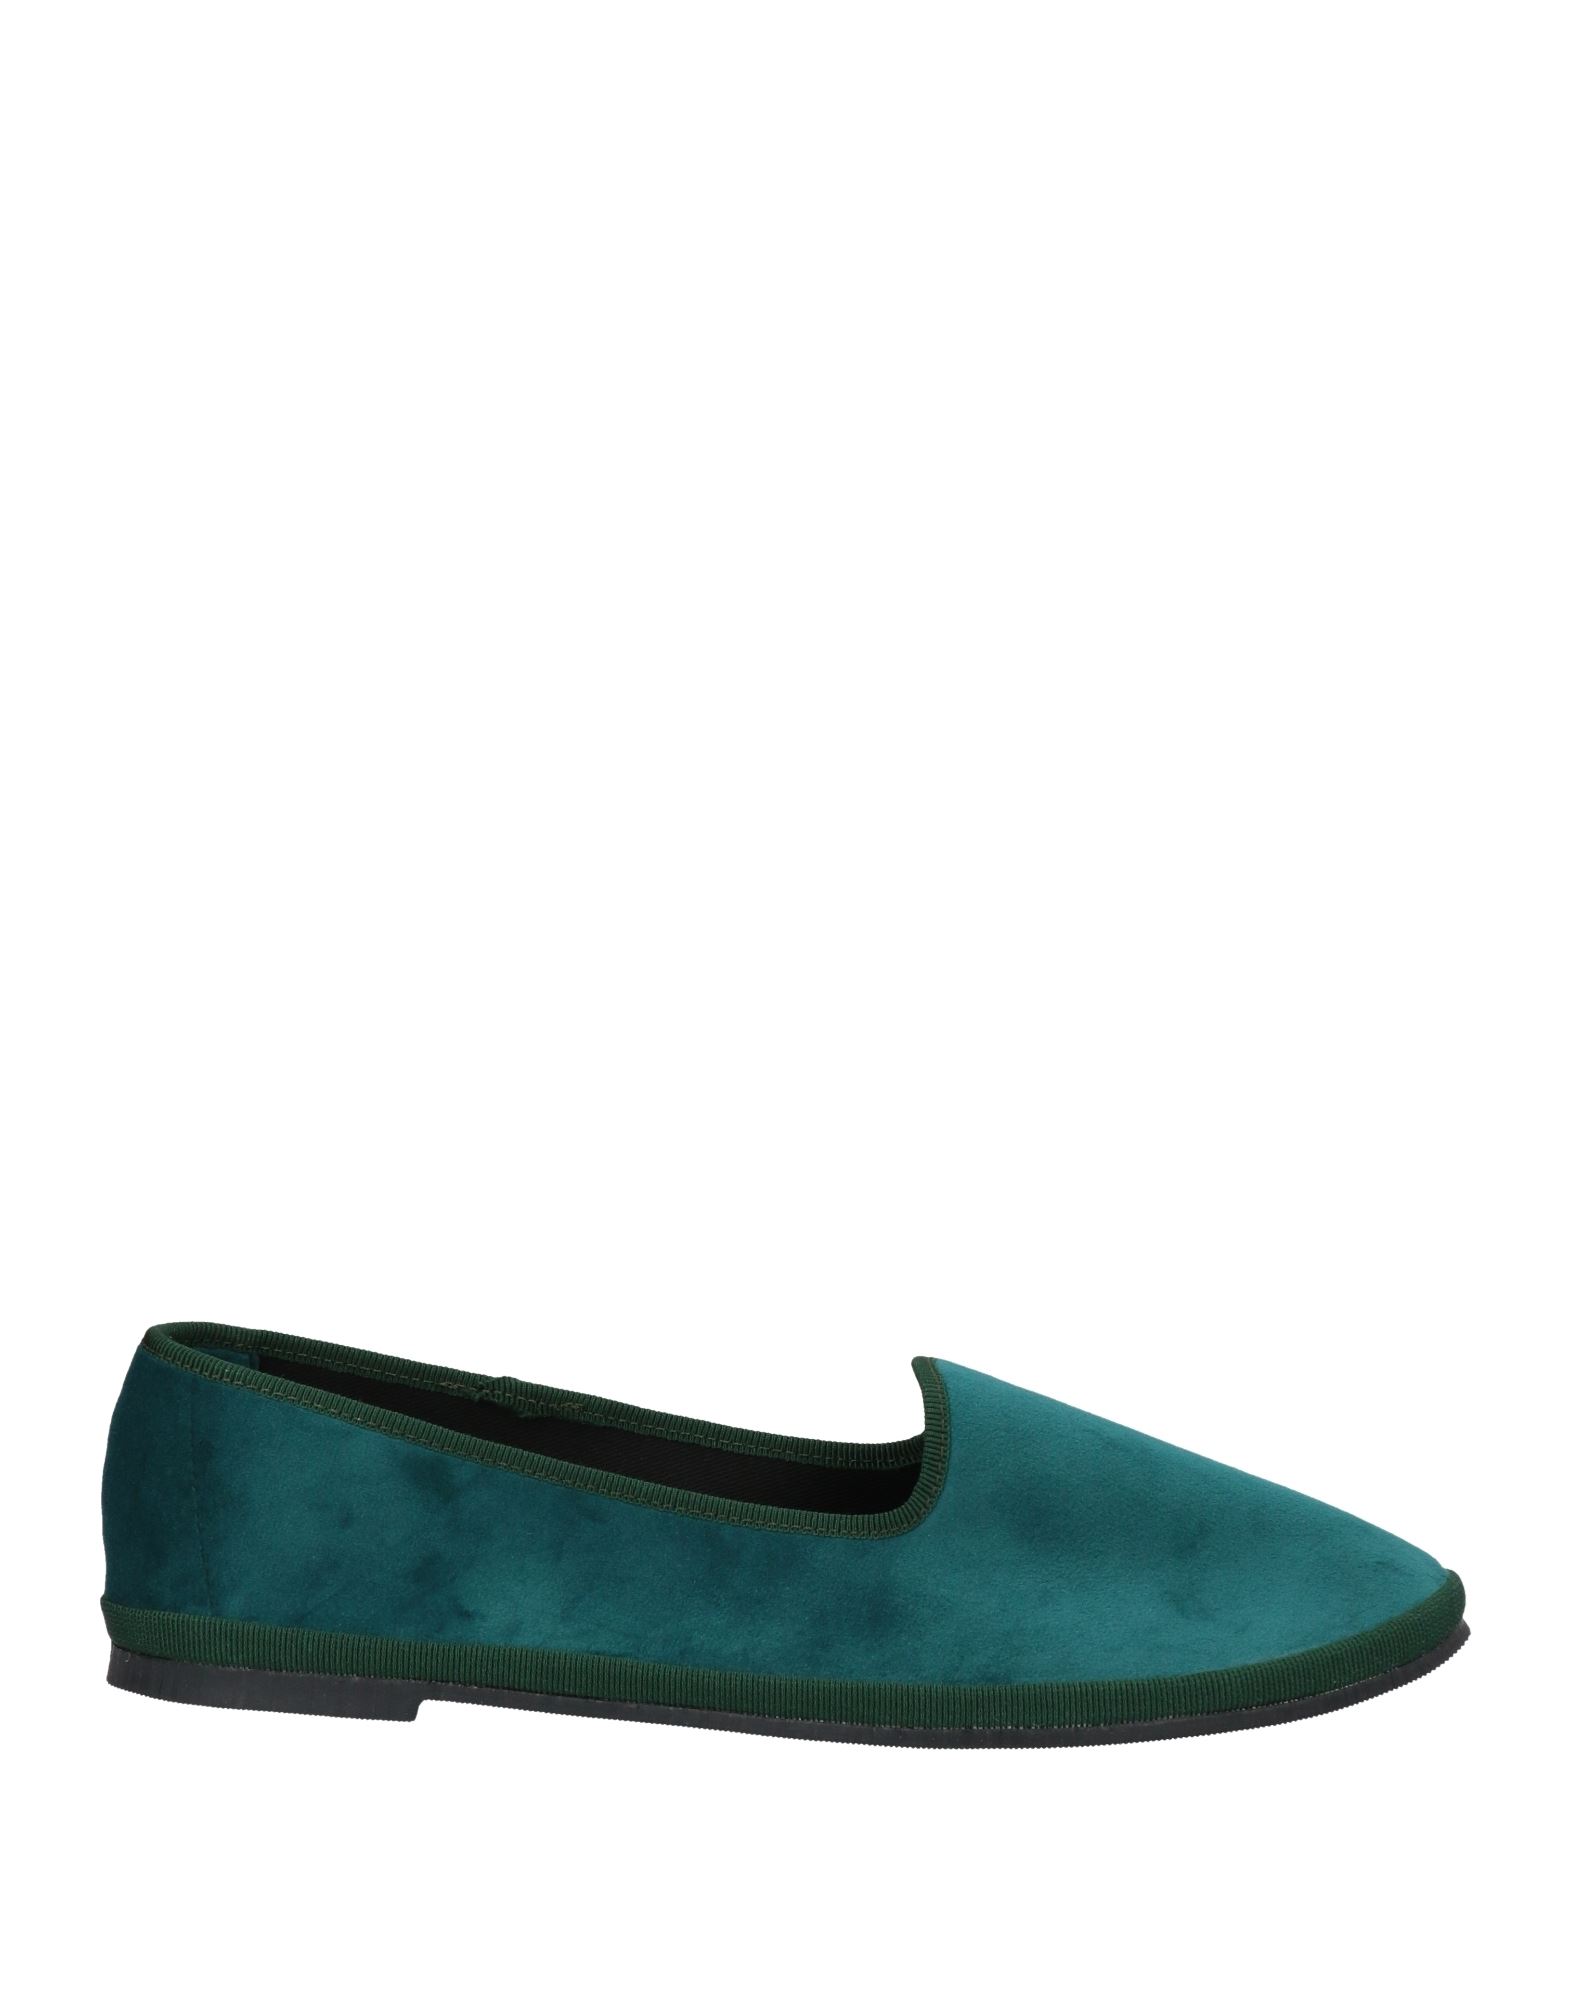 Ovye' By Cristina Lucchi Woman Loafers Deep Jade Size 8 Textile Fibers In Green